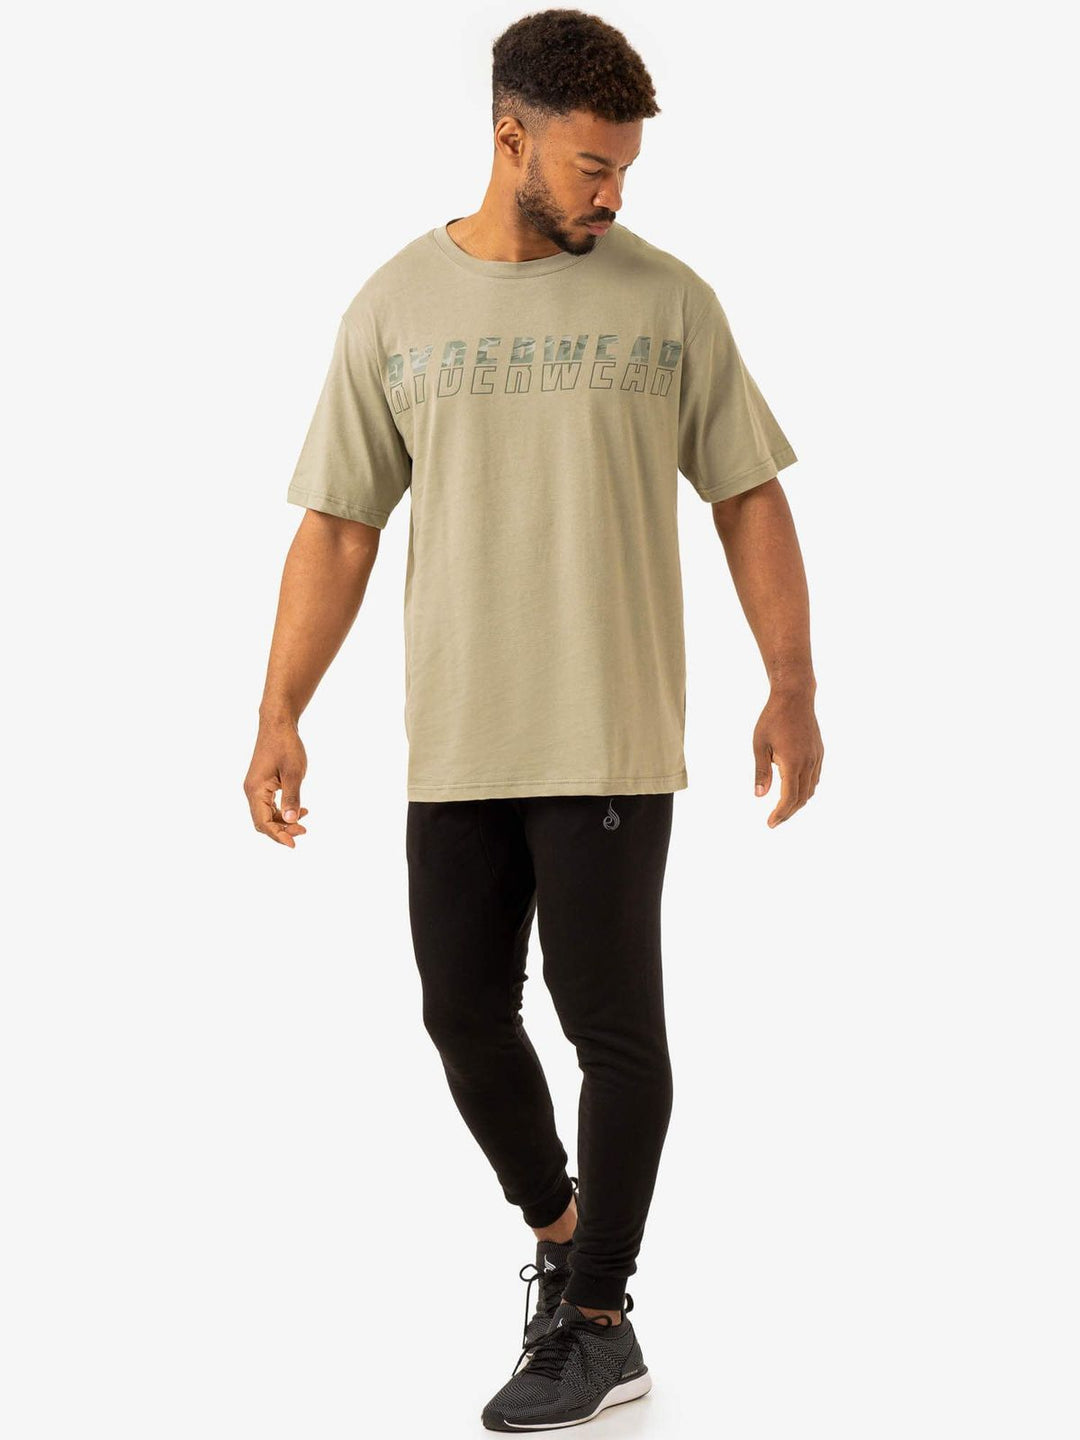 Overdrive Oversized T-Shirt - Sage Green Clothing Ryderwear 